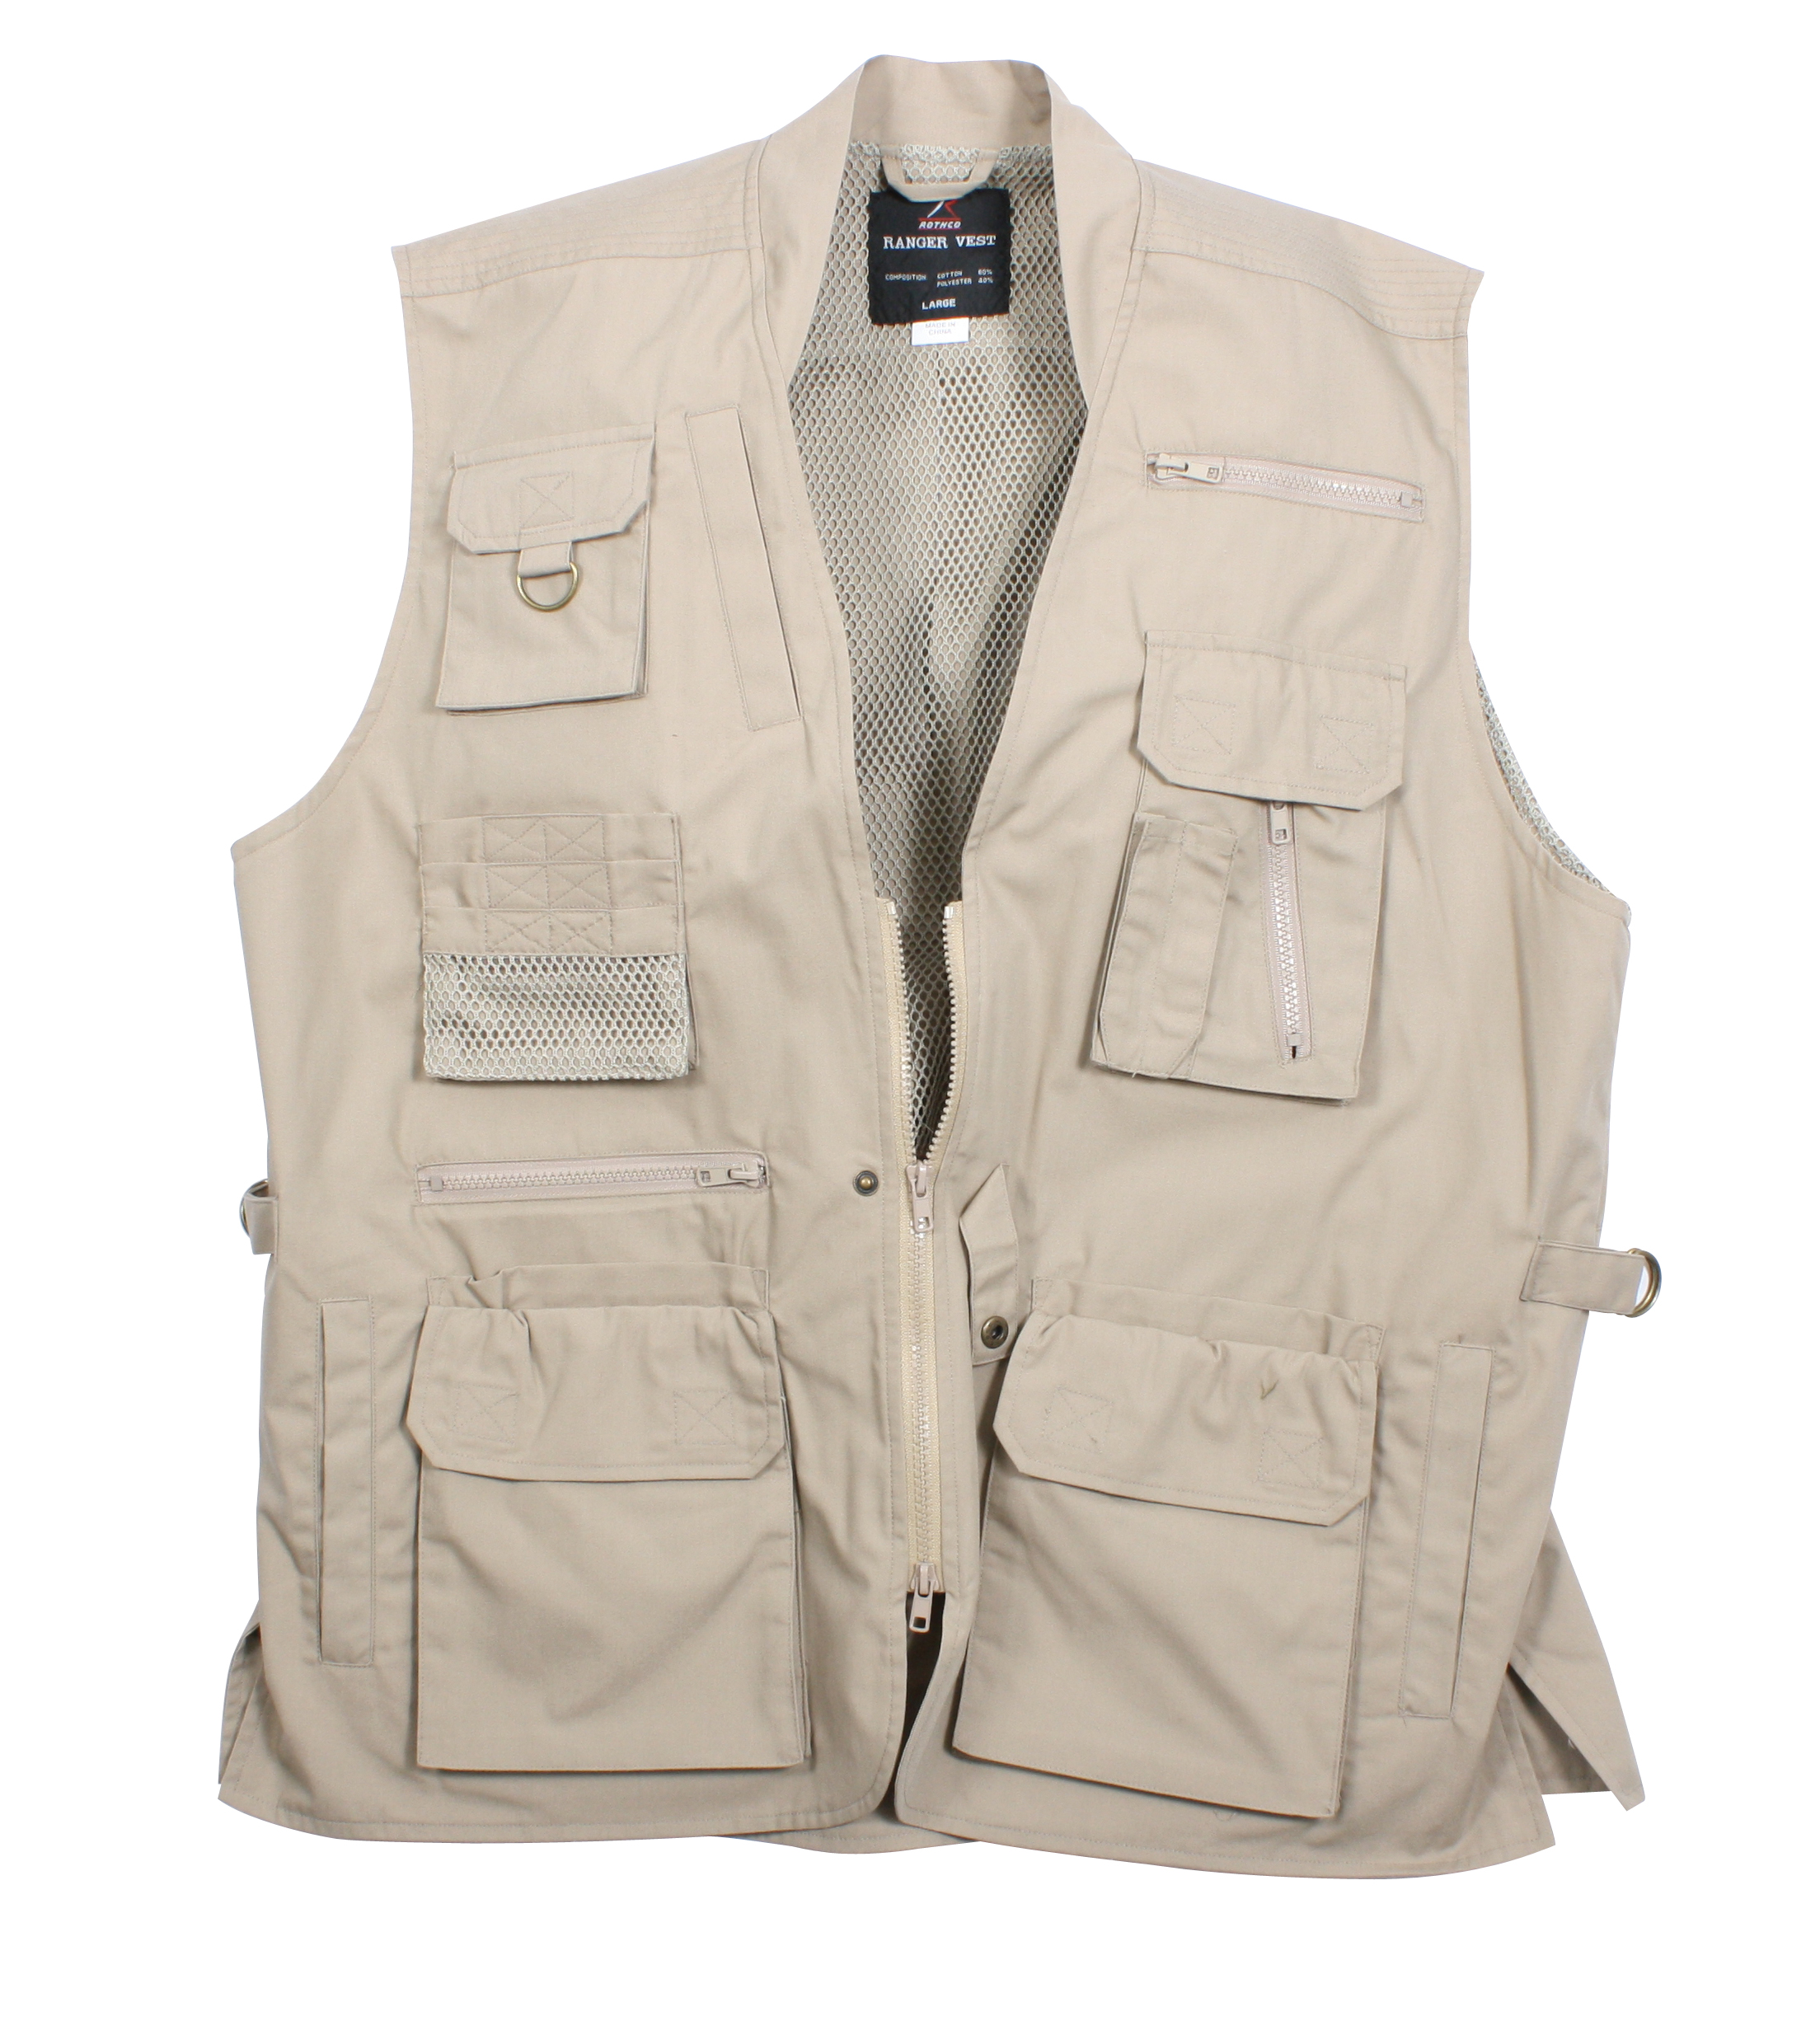 Rothco Khaki Plainclothes Military Concealed Carry Vest